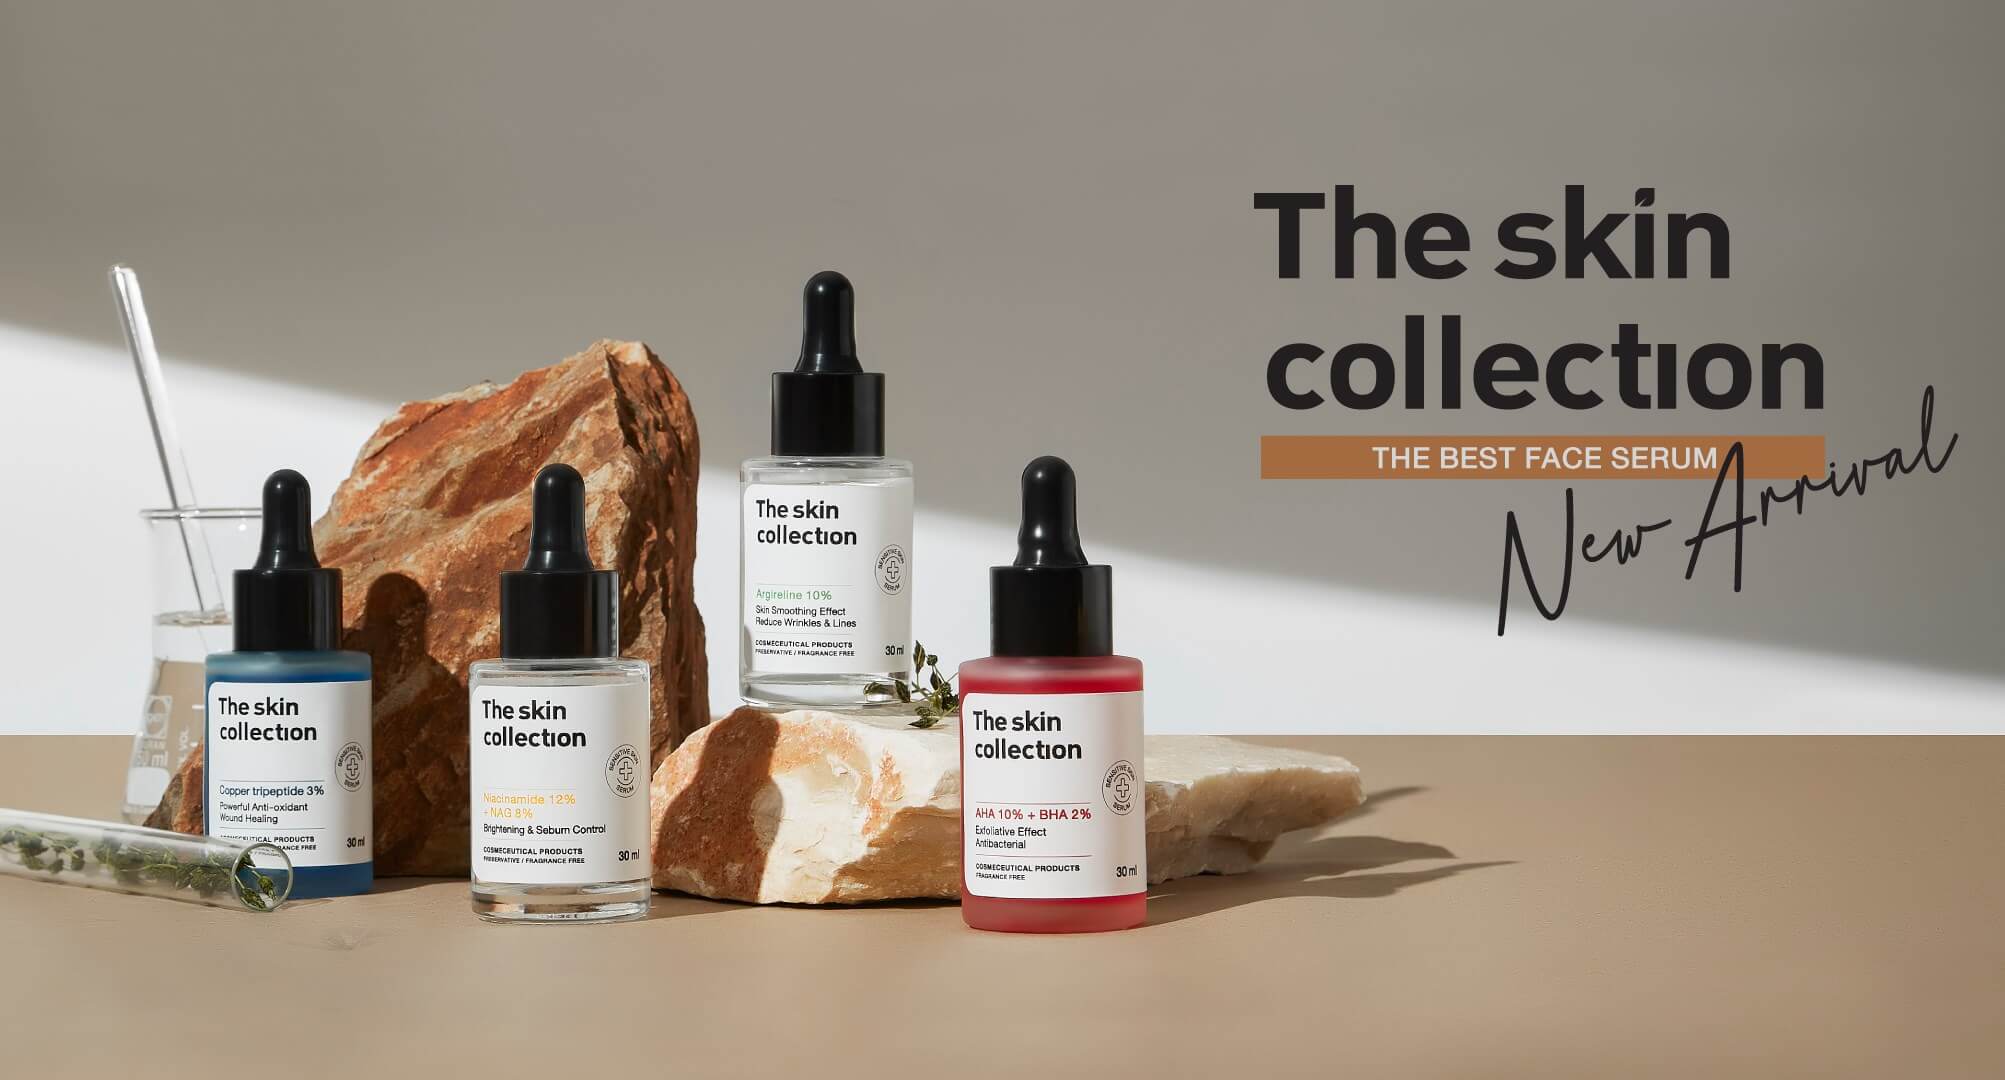 The Skin Collection,The Skin Collection Serum,Niacinamide,เซรั่ม,ซีรั่ม,Niacinamide